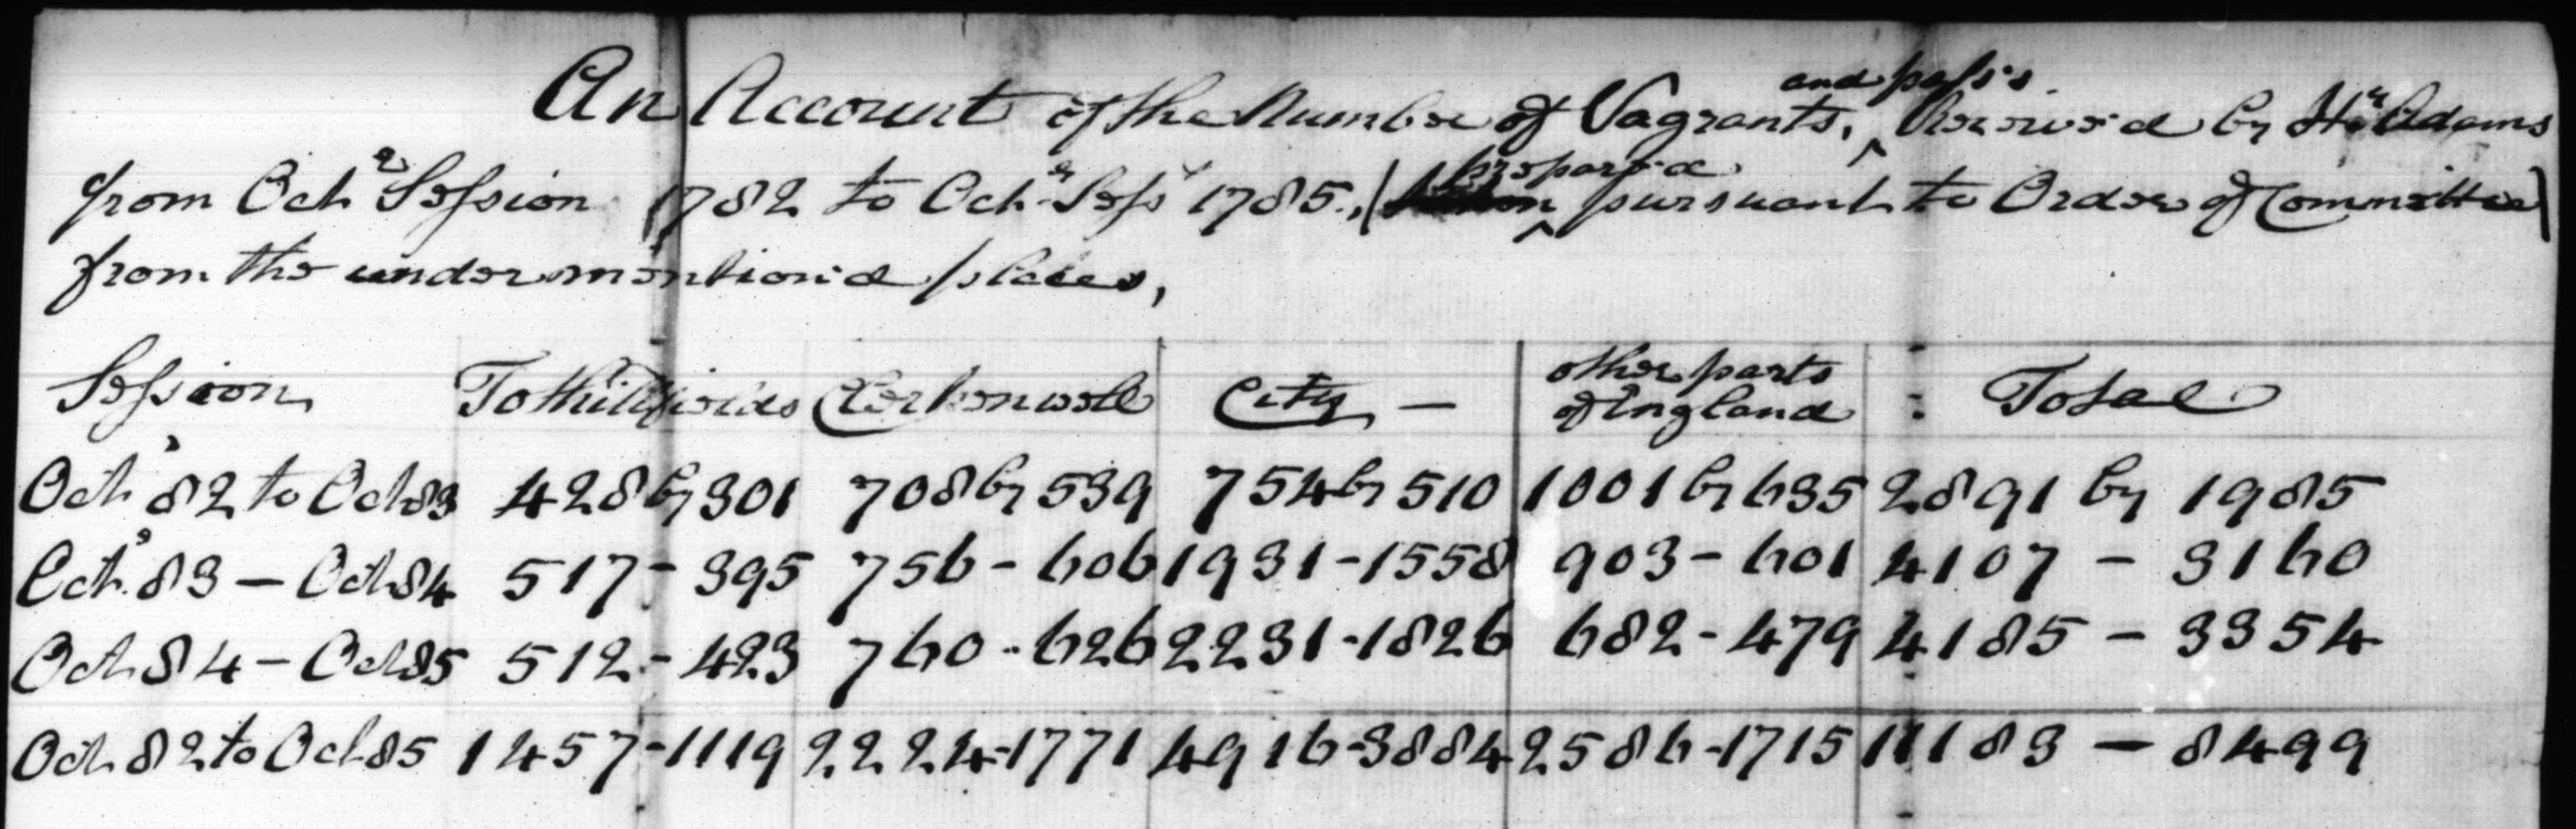 Figure 7.14 'An Account of the Number of Vagrants and pass's Received by Hy Adams from Octr Sessions 1782 to Octr Sesss 1785', [LL Middlesex Sessions Papers, April 1786 (LMSMPS508090239)](http://www.londonlives.org/browse.jsp?div=LMSMPS50809PS508090239).